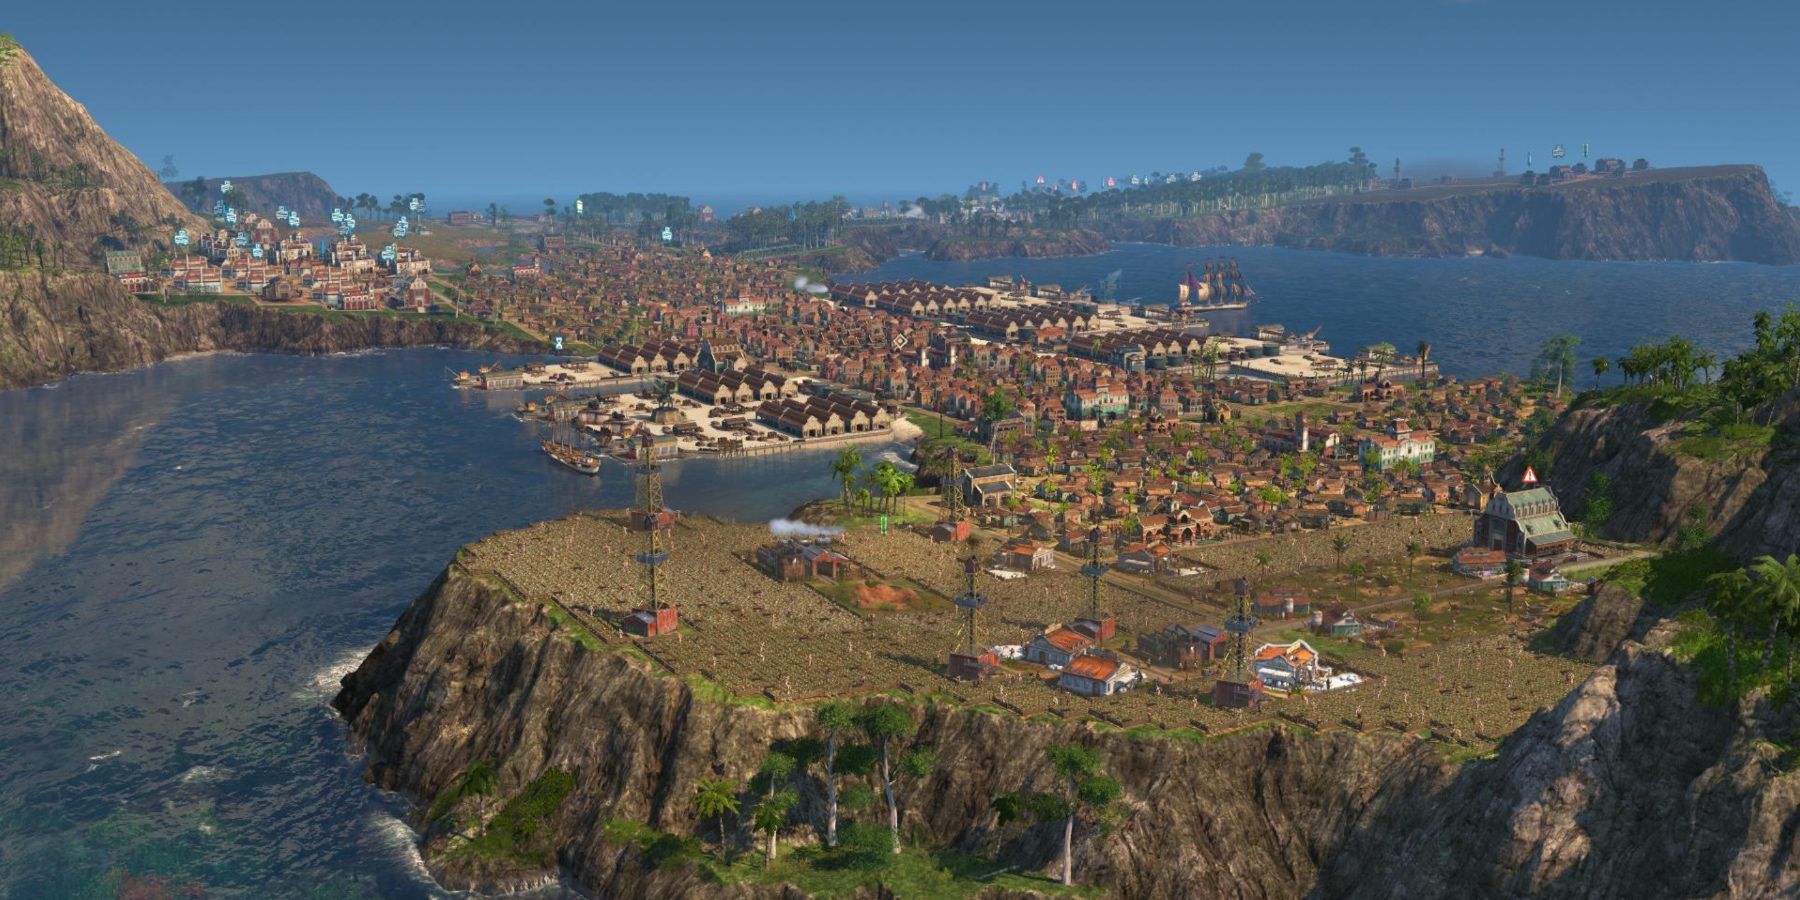 A city stretching across multiple islands in Anno 1800